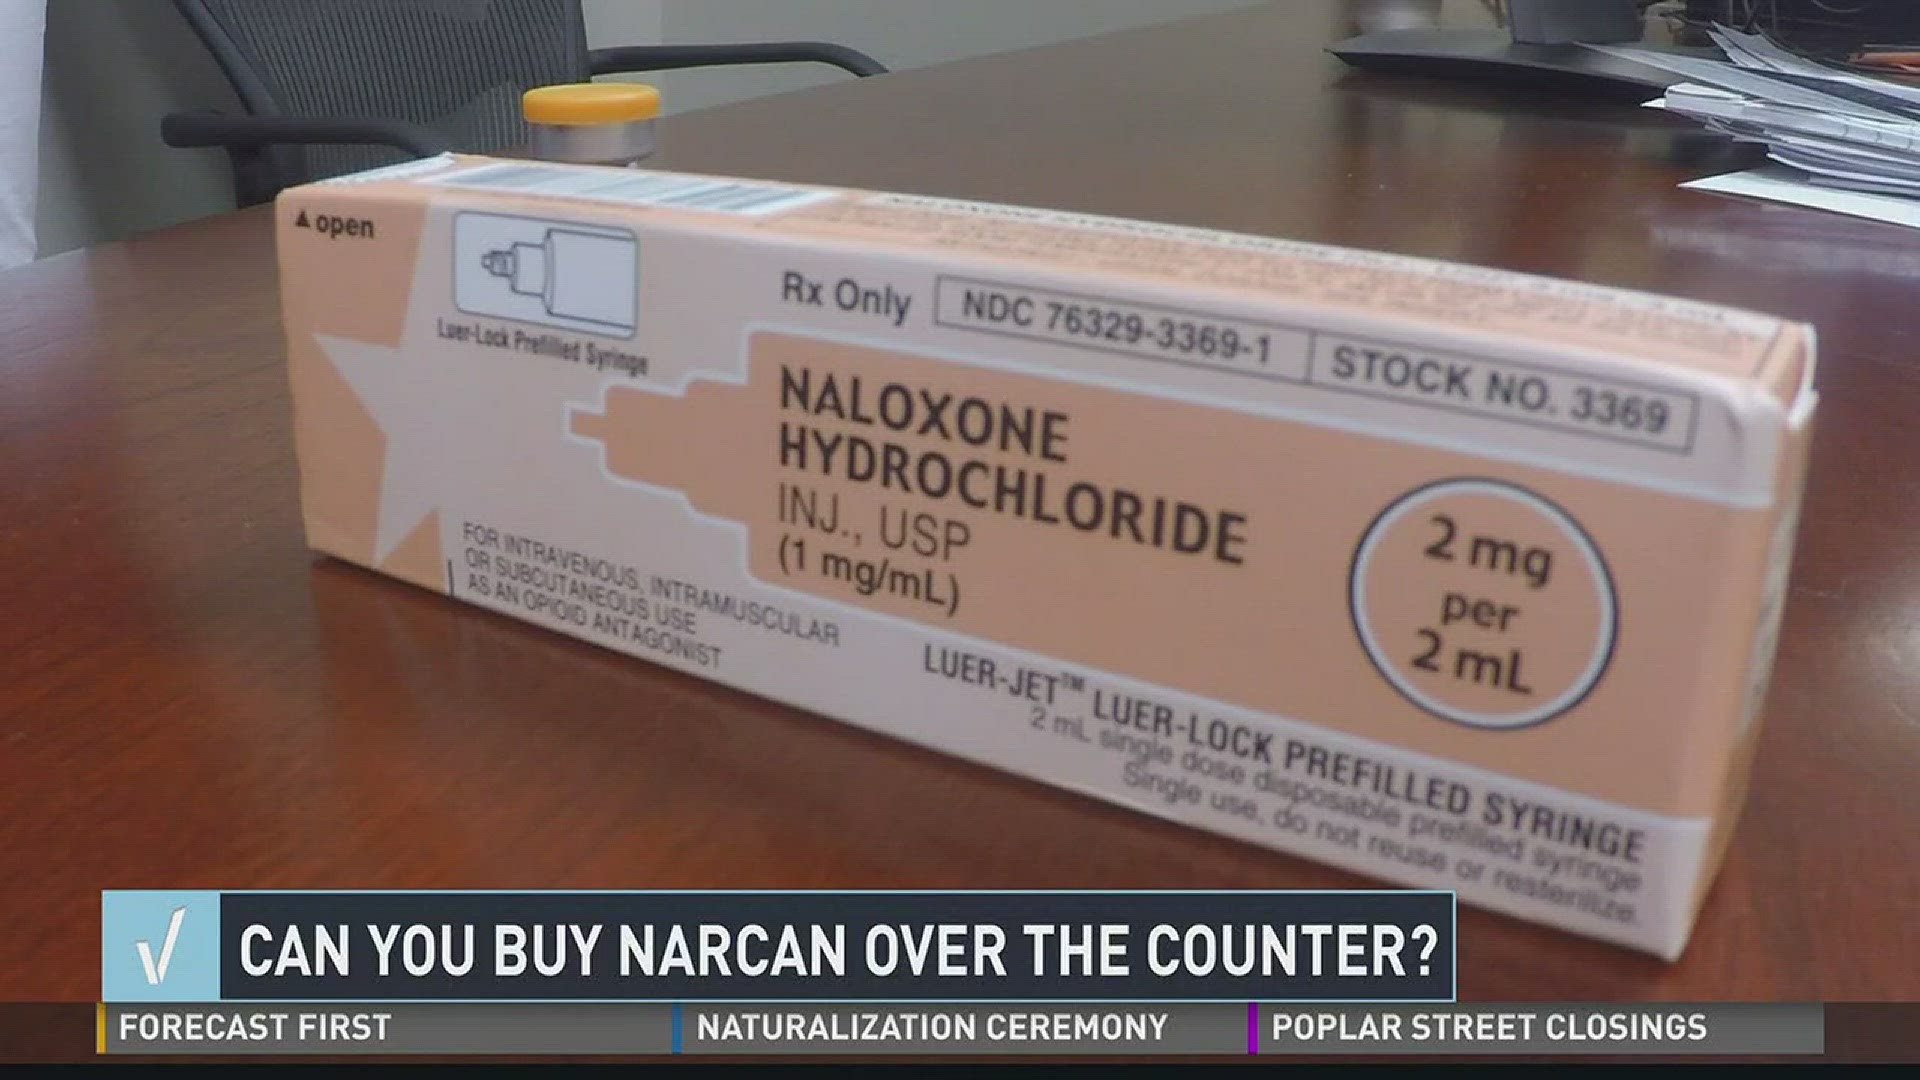 Verify: Can Narcan be bought over the counter?